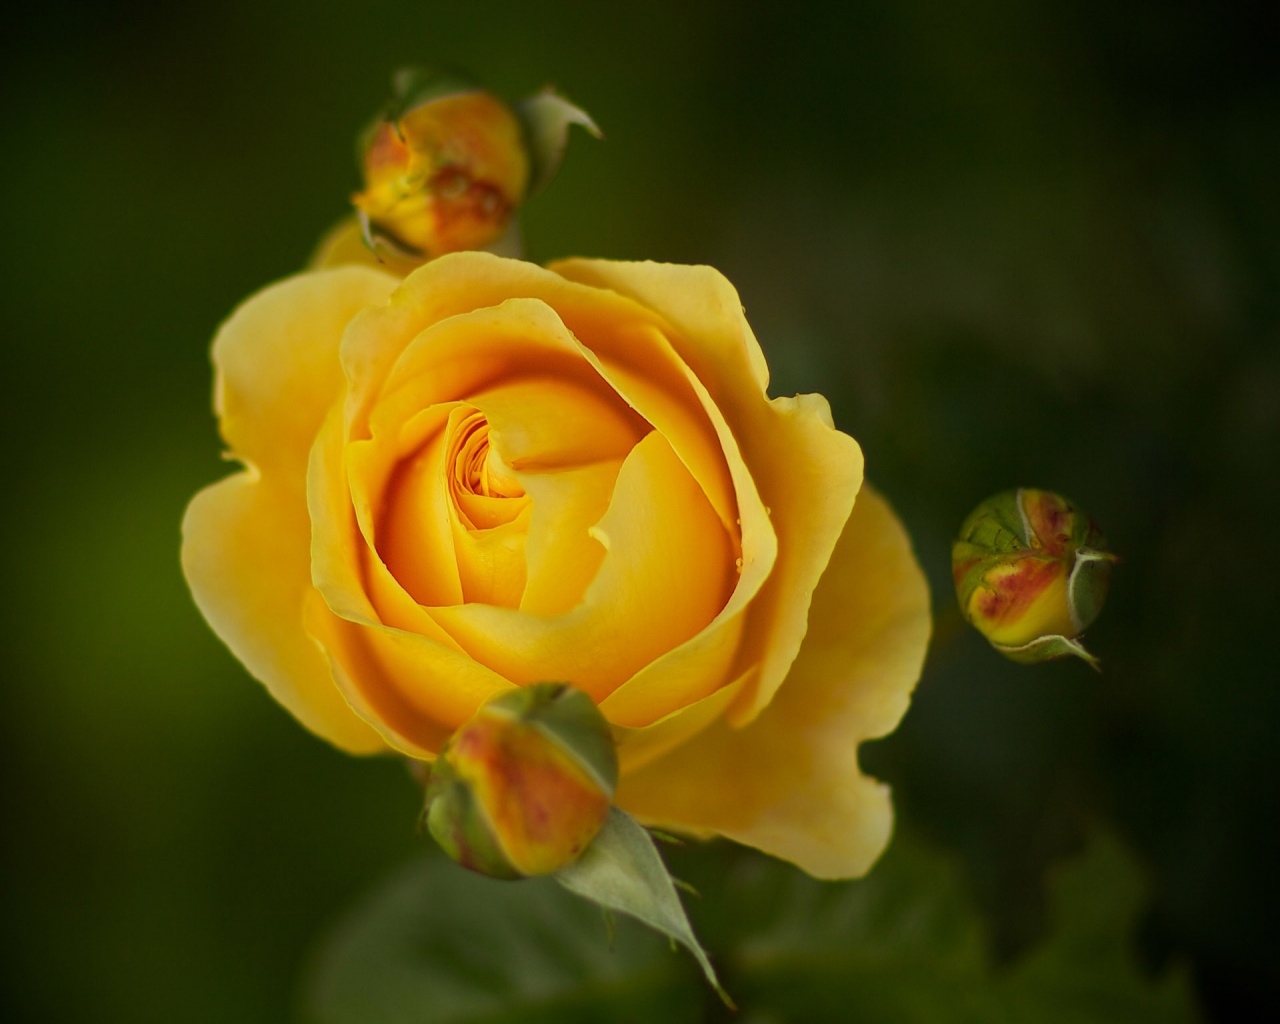 Yellow rose 1280x1024 wallpaper download page 201377